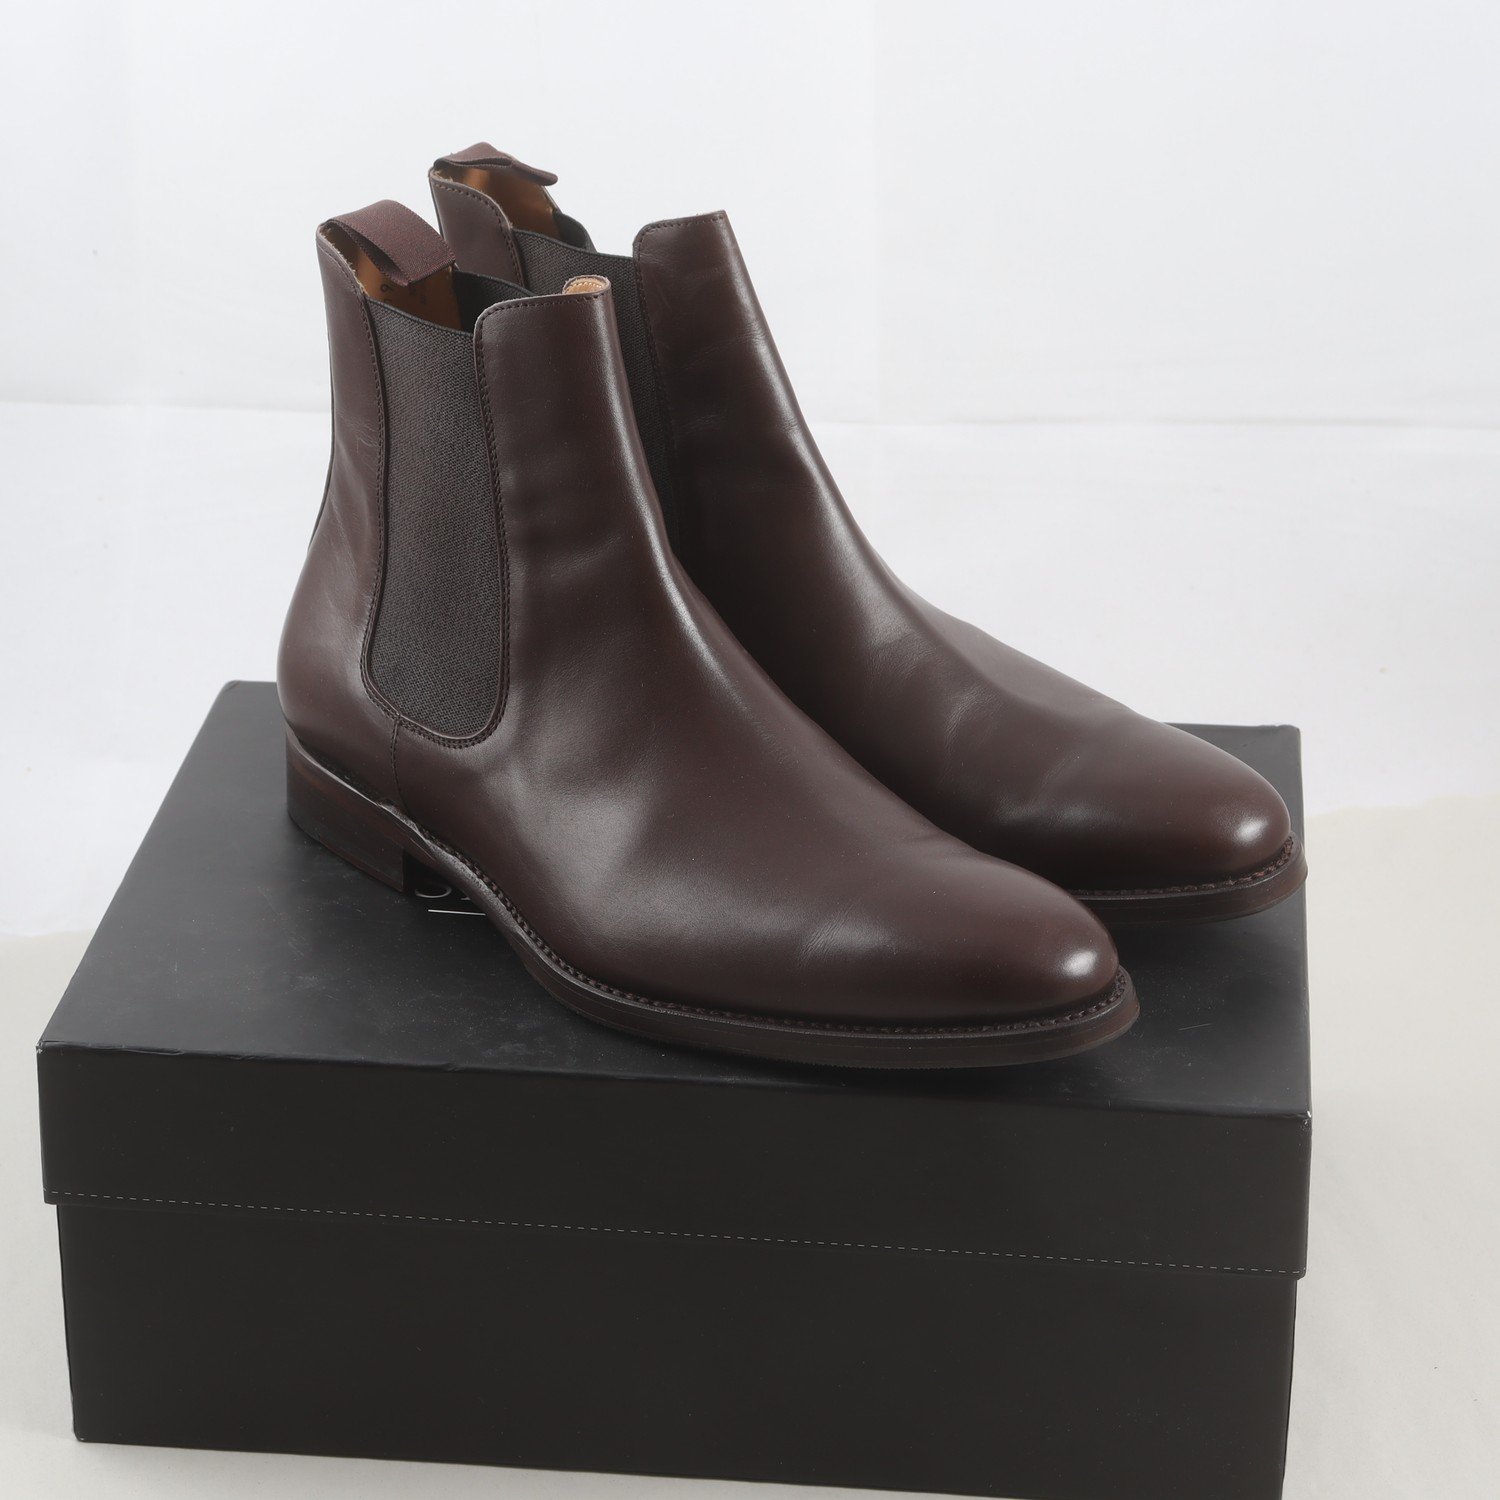 Chelsea Boots, Shoepassion, Berlin, stl. 9 (43,5)